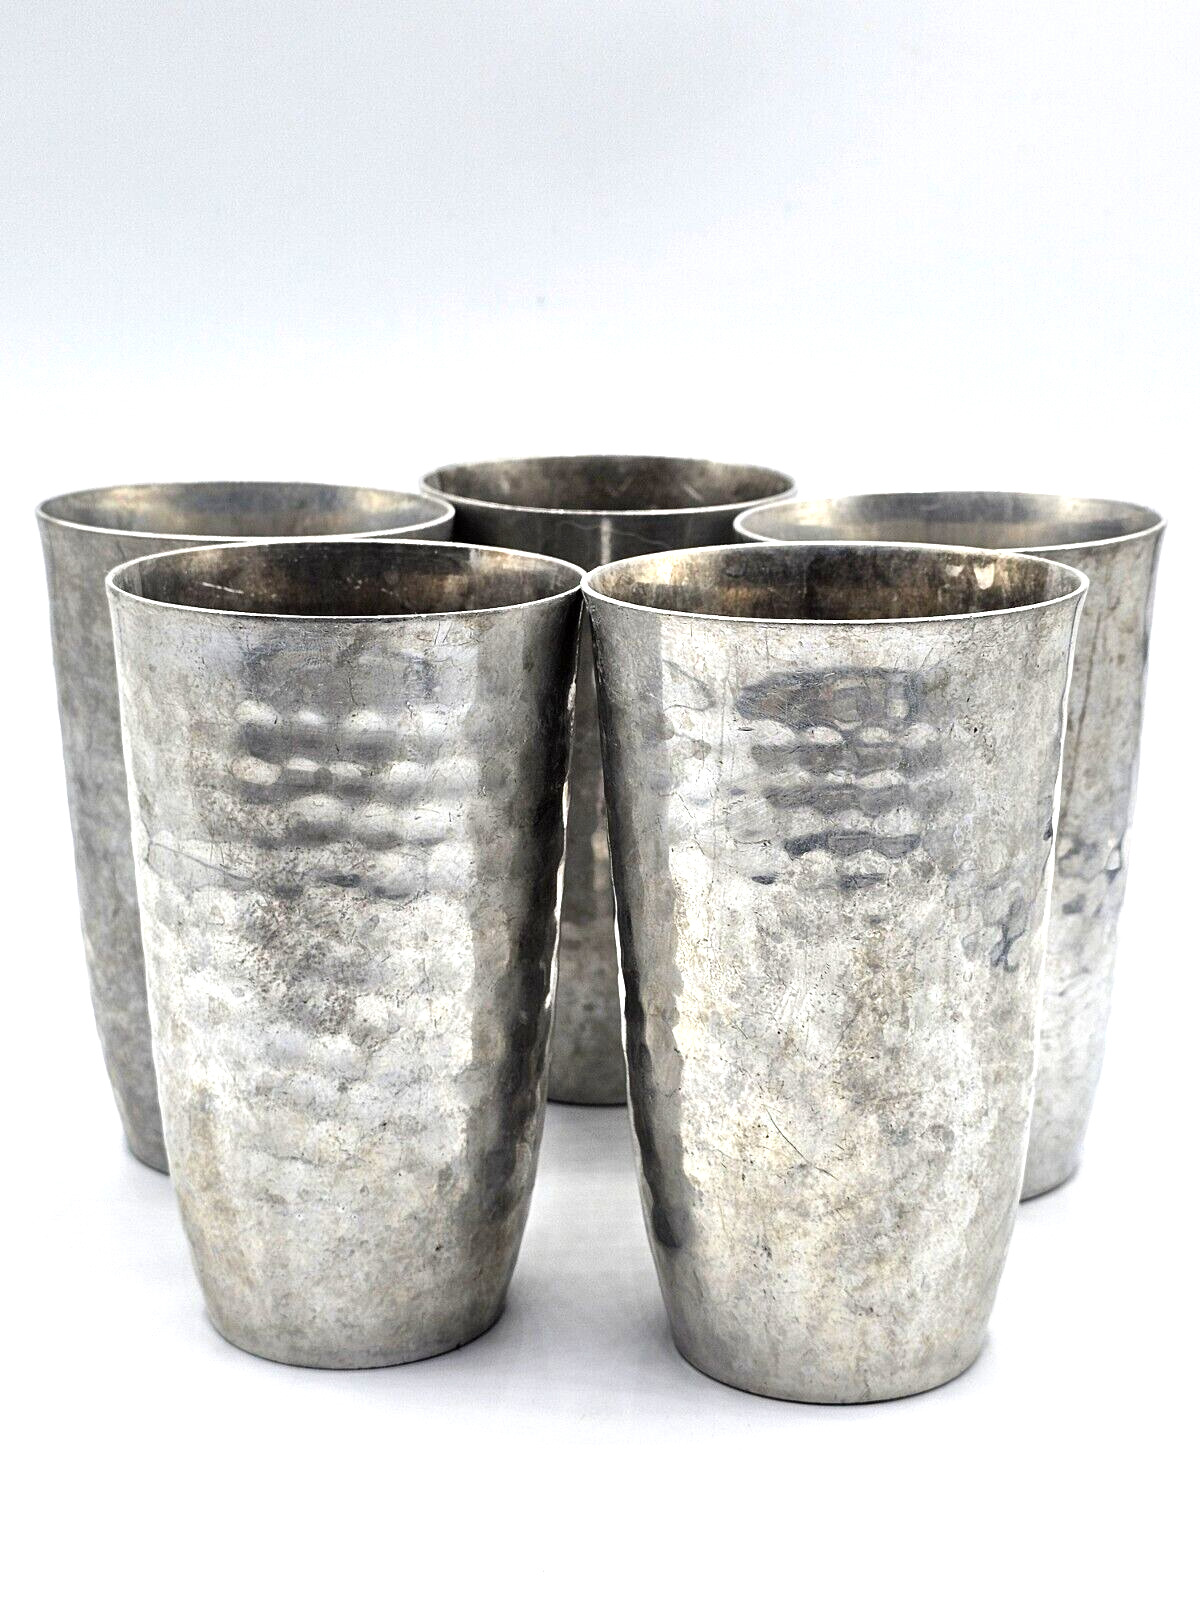 VTG VGUC LOT of 5 MMM Hammered Aluminum Tumbler Cups Art Deco MCM from Spain